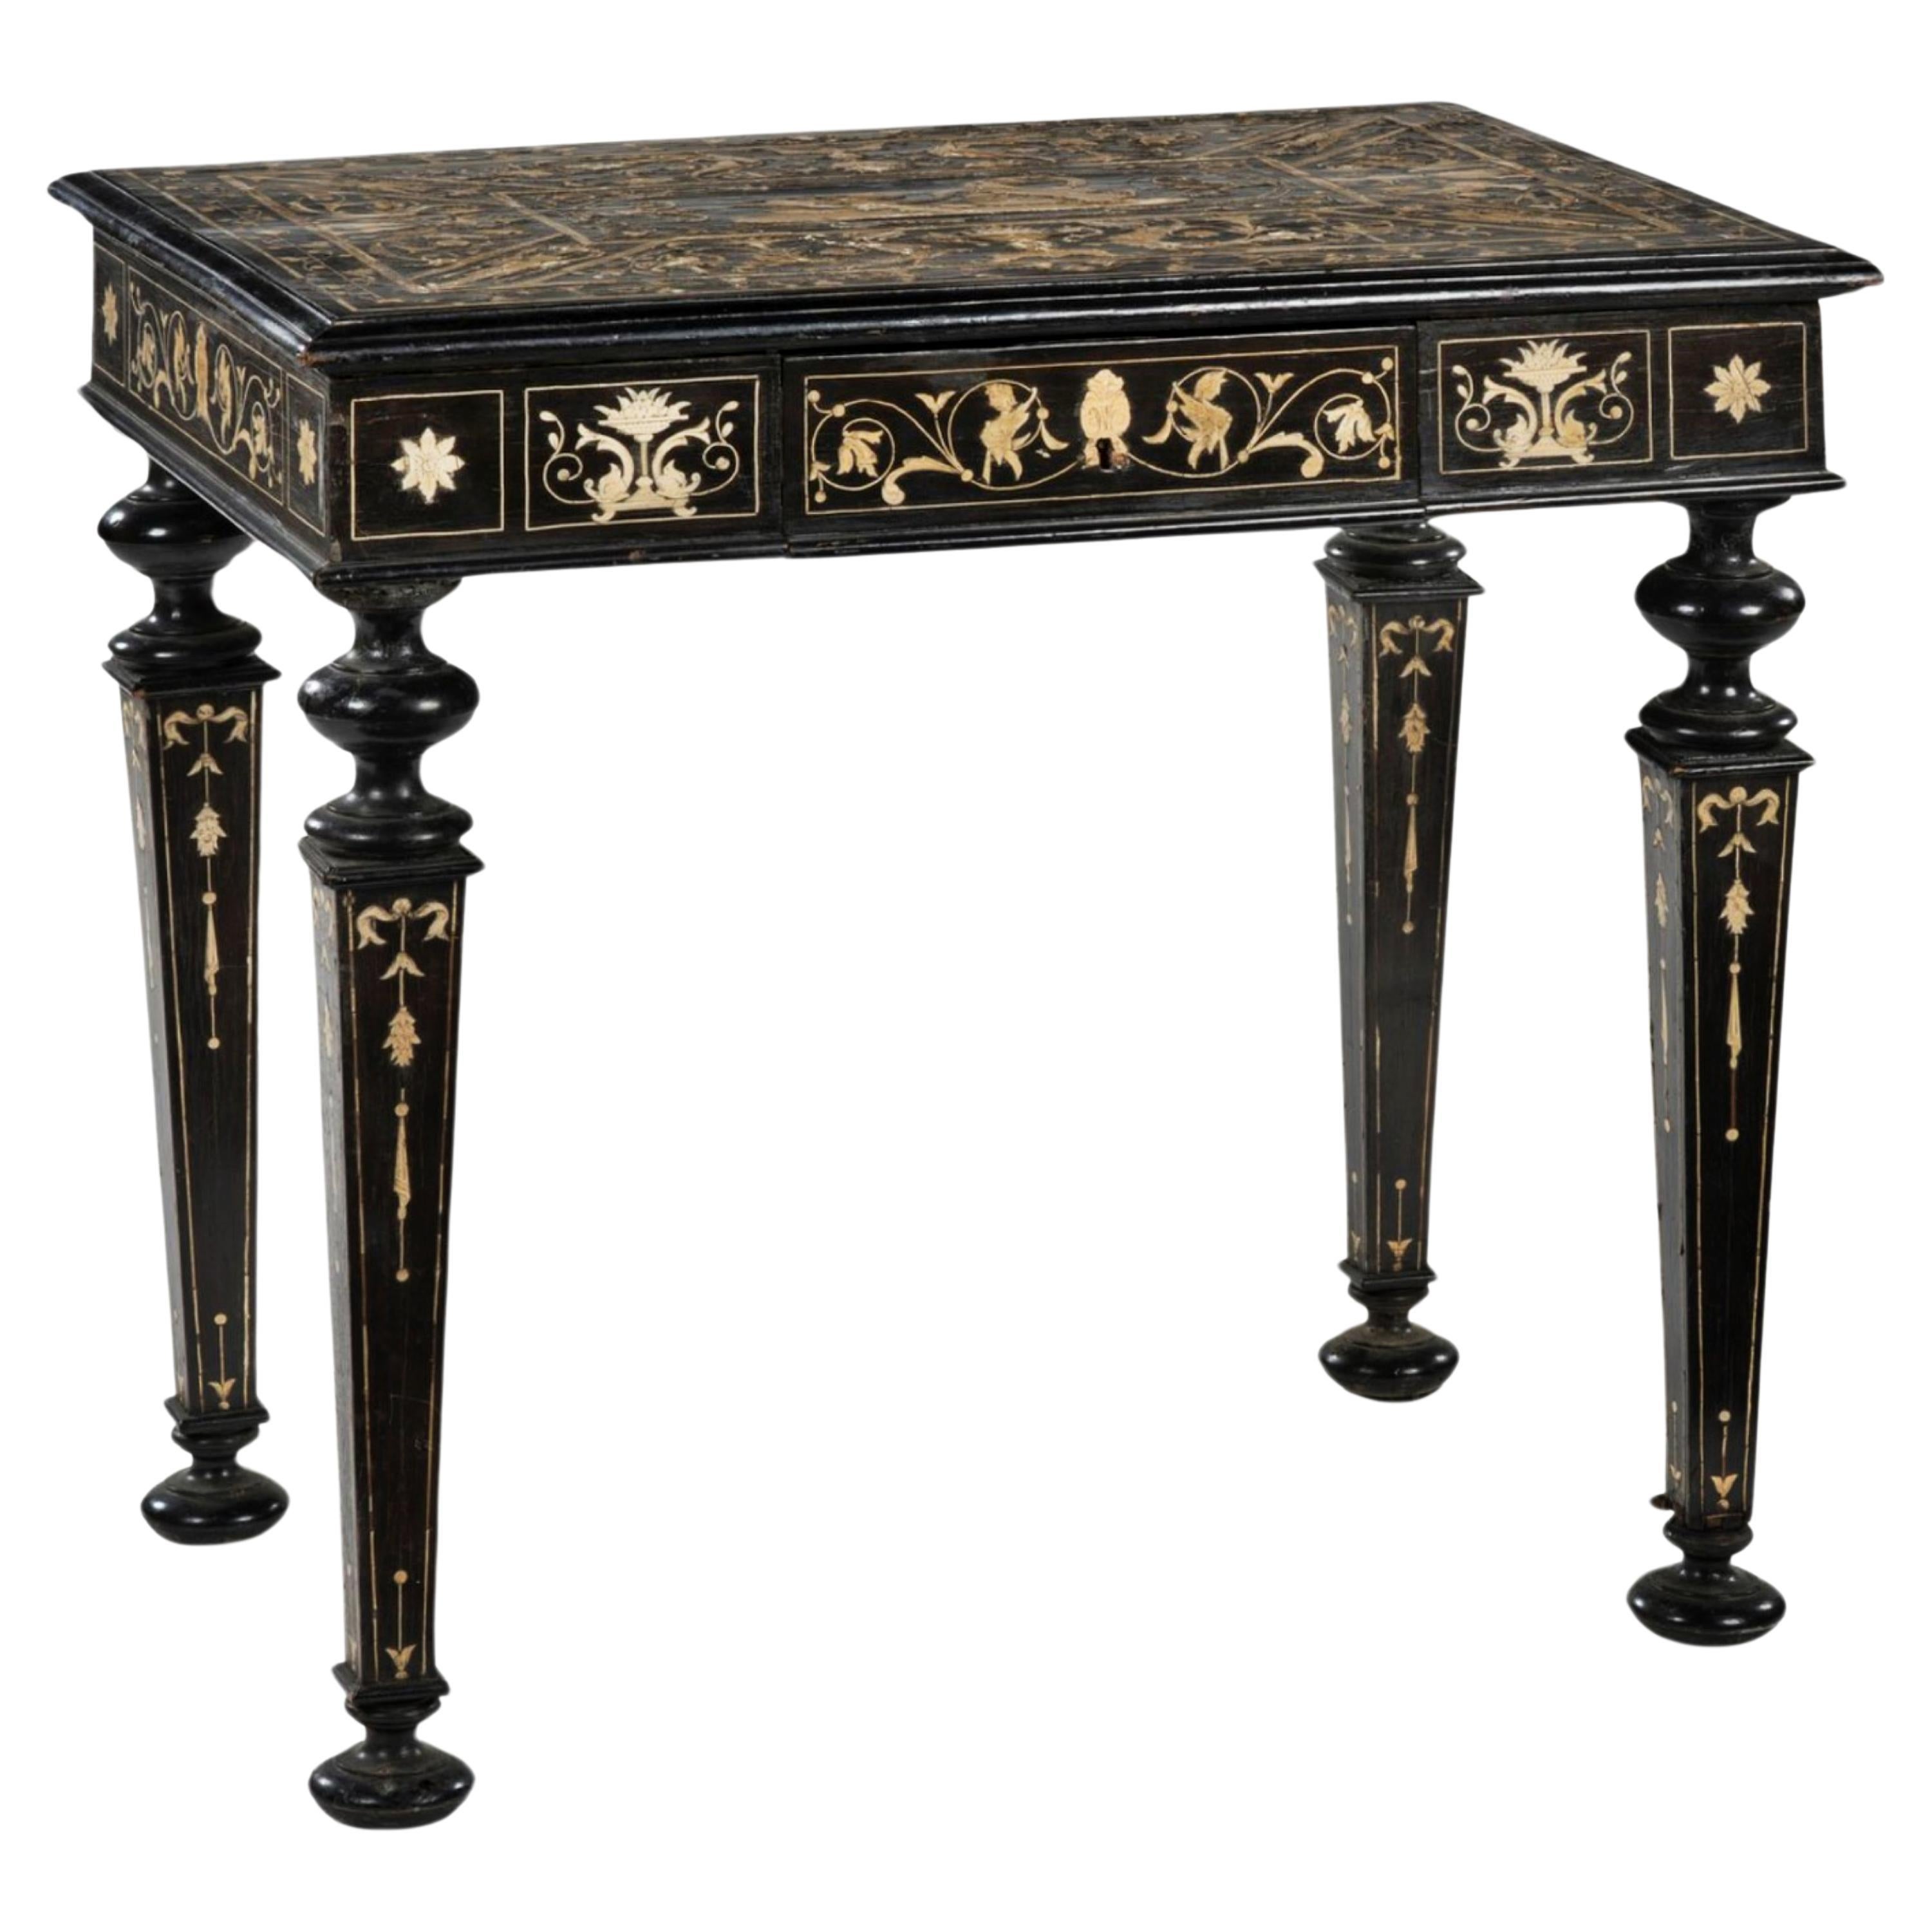 Italian Table in Ebonized Wood and Engraved Inlays 19th Century For Sale